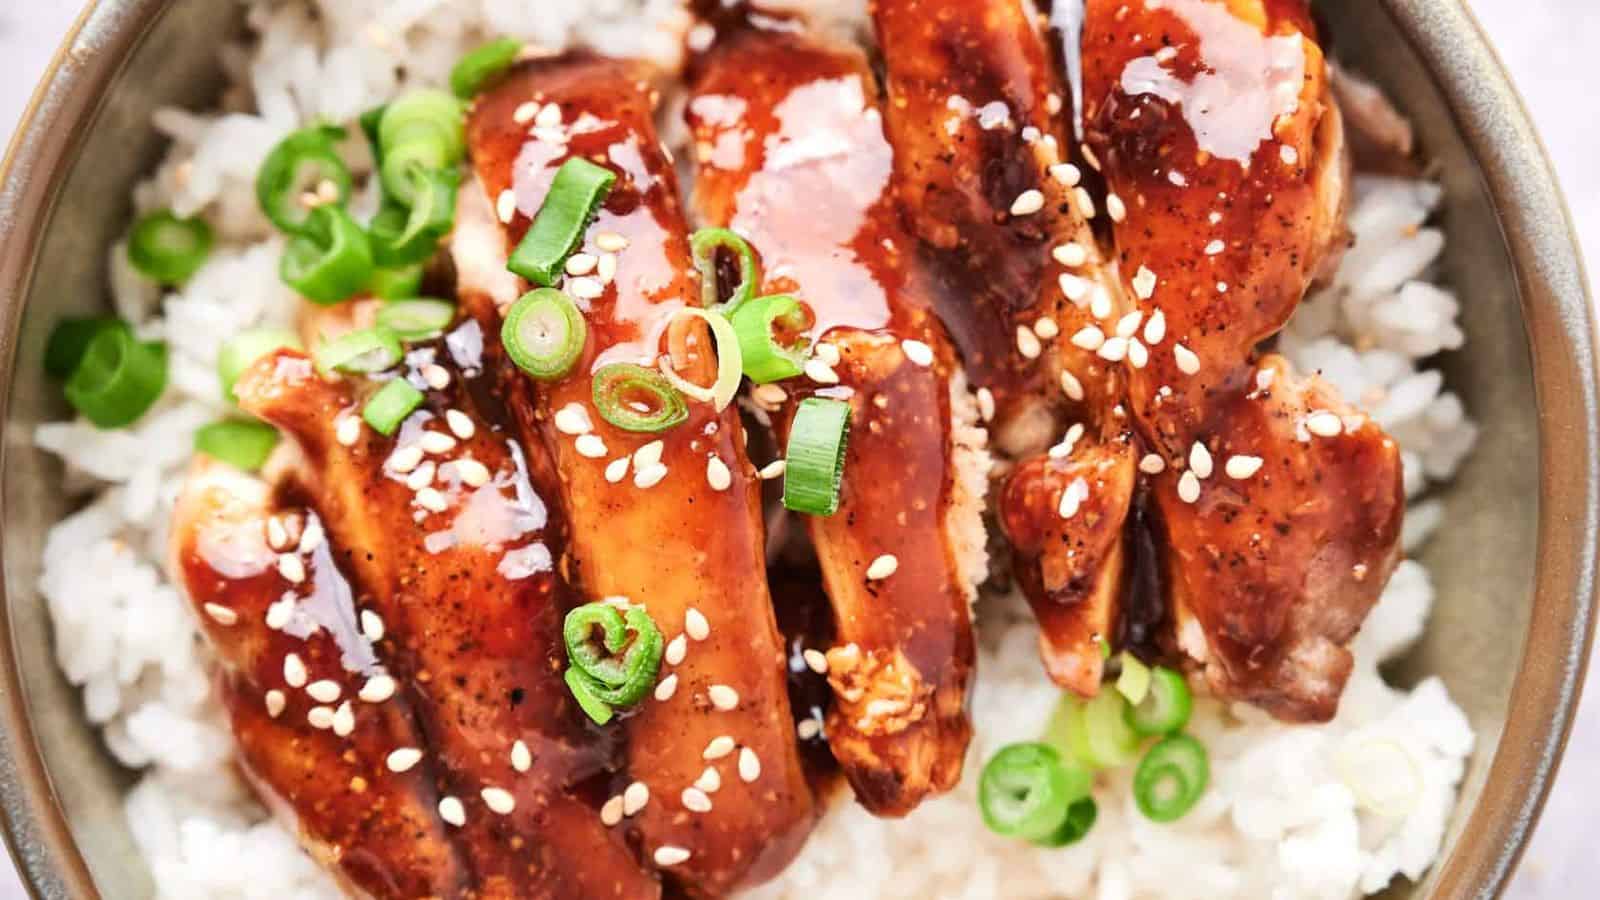 <p>With our Teriyaki Chicken as good as Panda Express's, dinner just got a whole lot more exciting. This is one dish the family will keep on rotation. You can serve it over rice and watch it disappear in minutes. It's quick, delicious, and a surefire winner in the chicken dinner game.<br><strong>Get the Recipe: </strong><a href="https://www.pocketfriendlyrecipes.com/panda-express-teriyaki-chicken-recipe/?utm_source=msn&utm_medium=page&utm_campaign=msn">Panda Express Teriyaki Chicken</a></p>